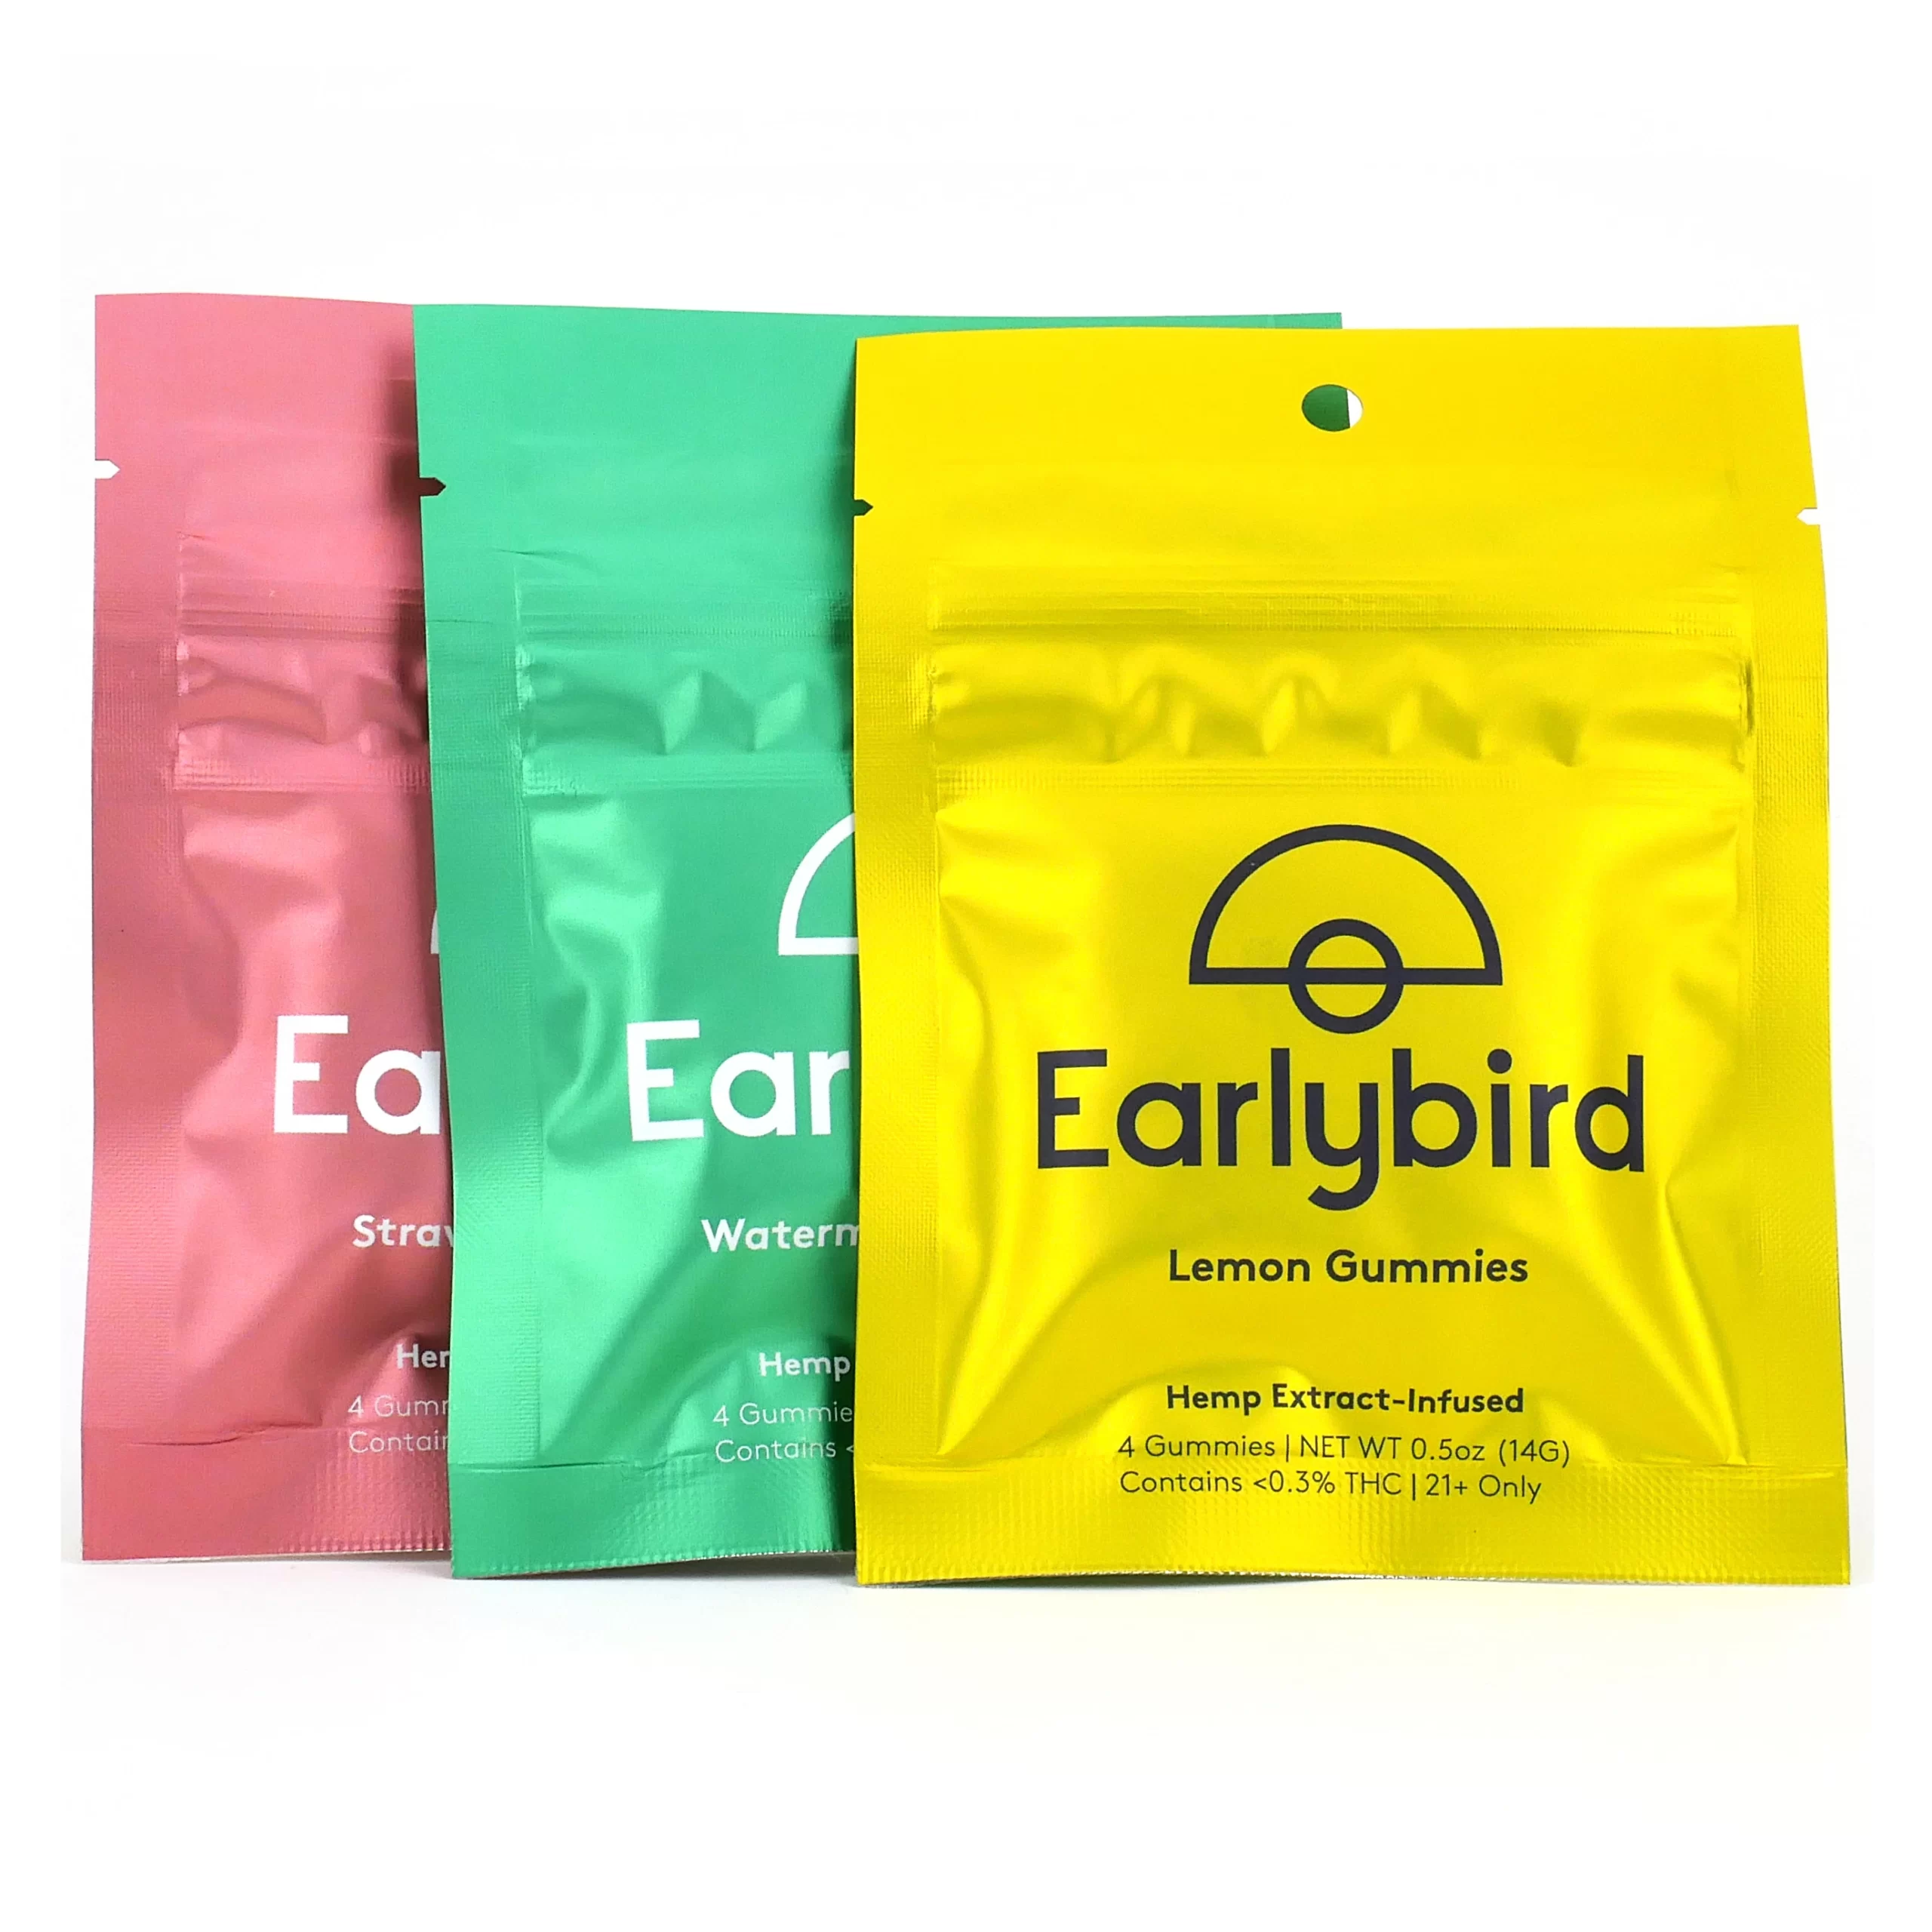 Earlybird CBD Gummies [Review] Safe to Buy or Scam Product?